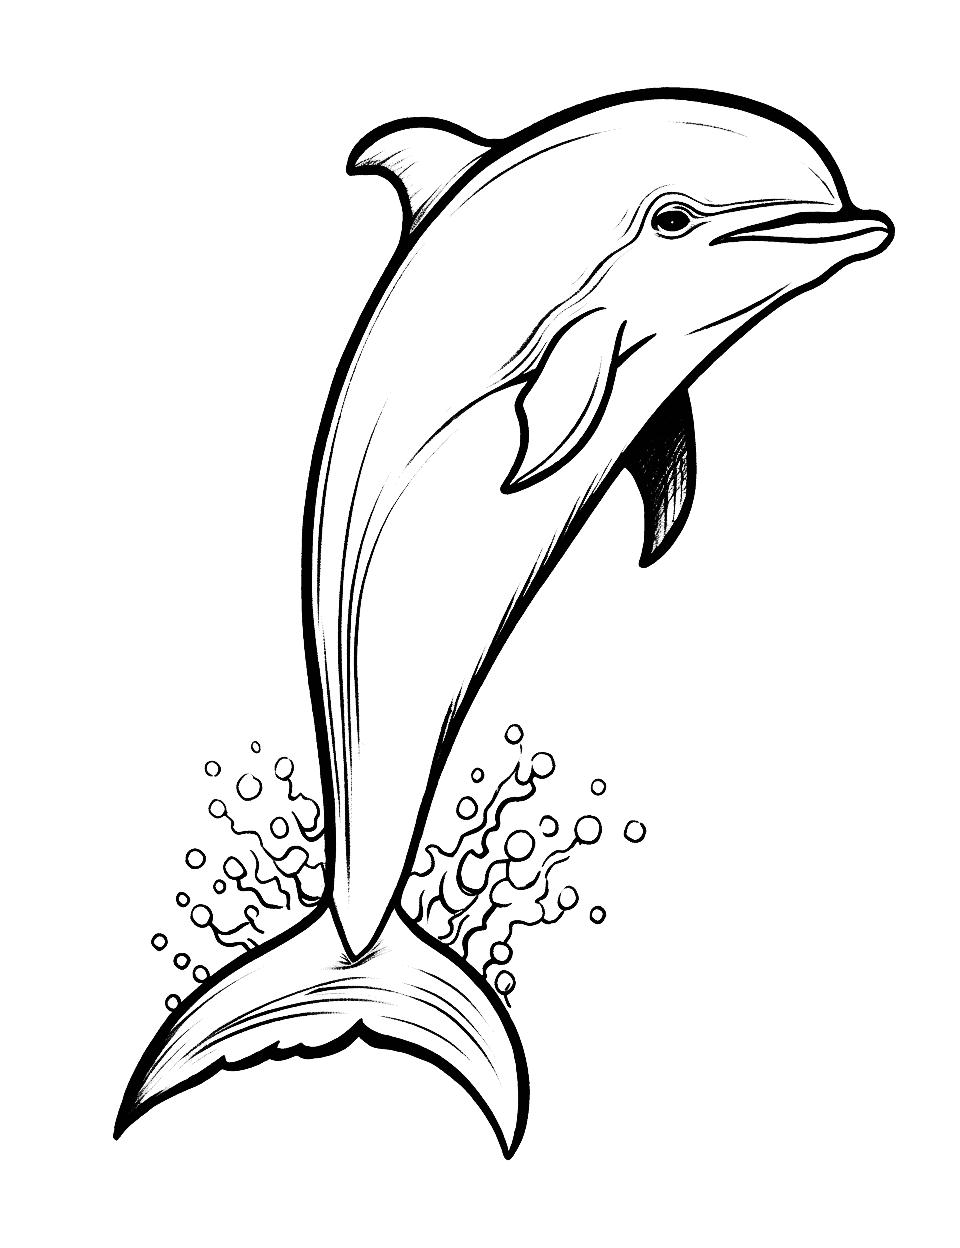 Dolphin Jumping Out of Water Cute Coloring Page - A dolphin leaping out of the water, creating a splash.